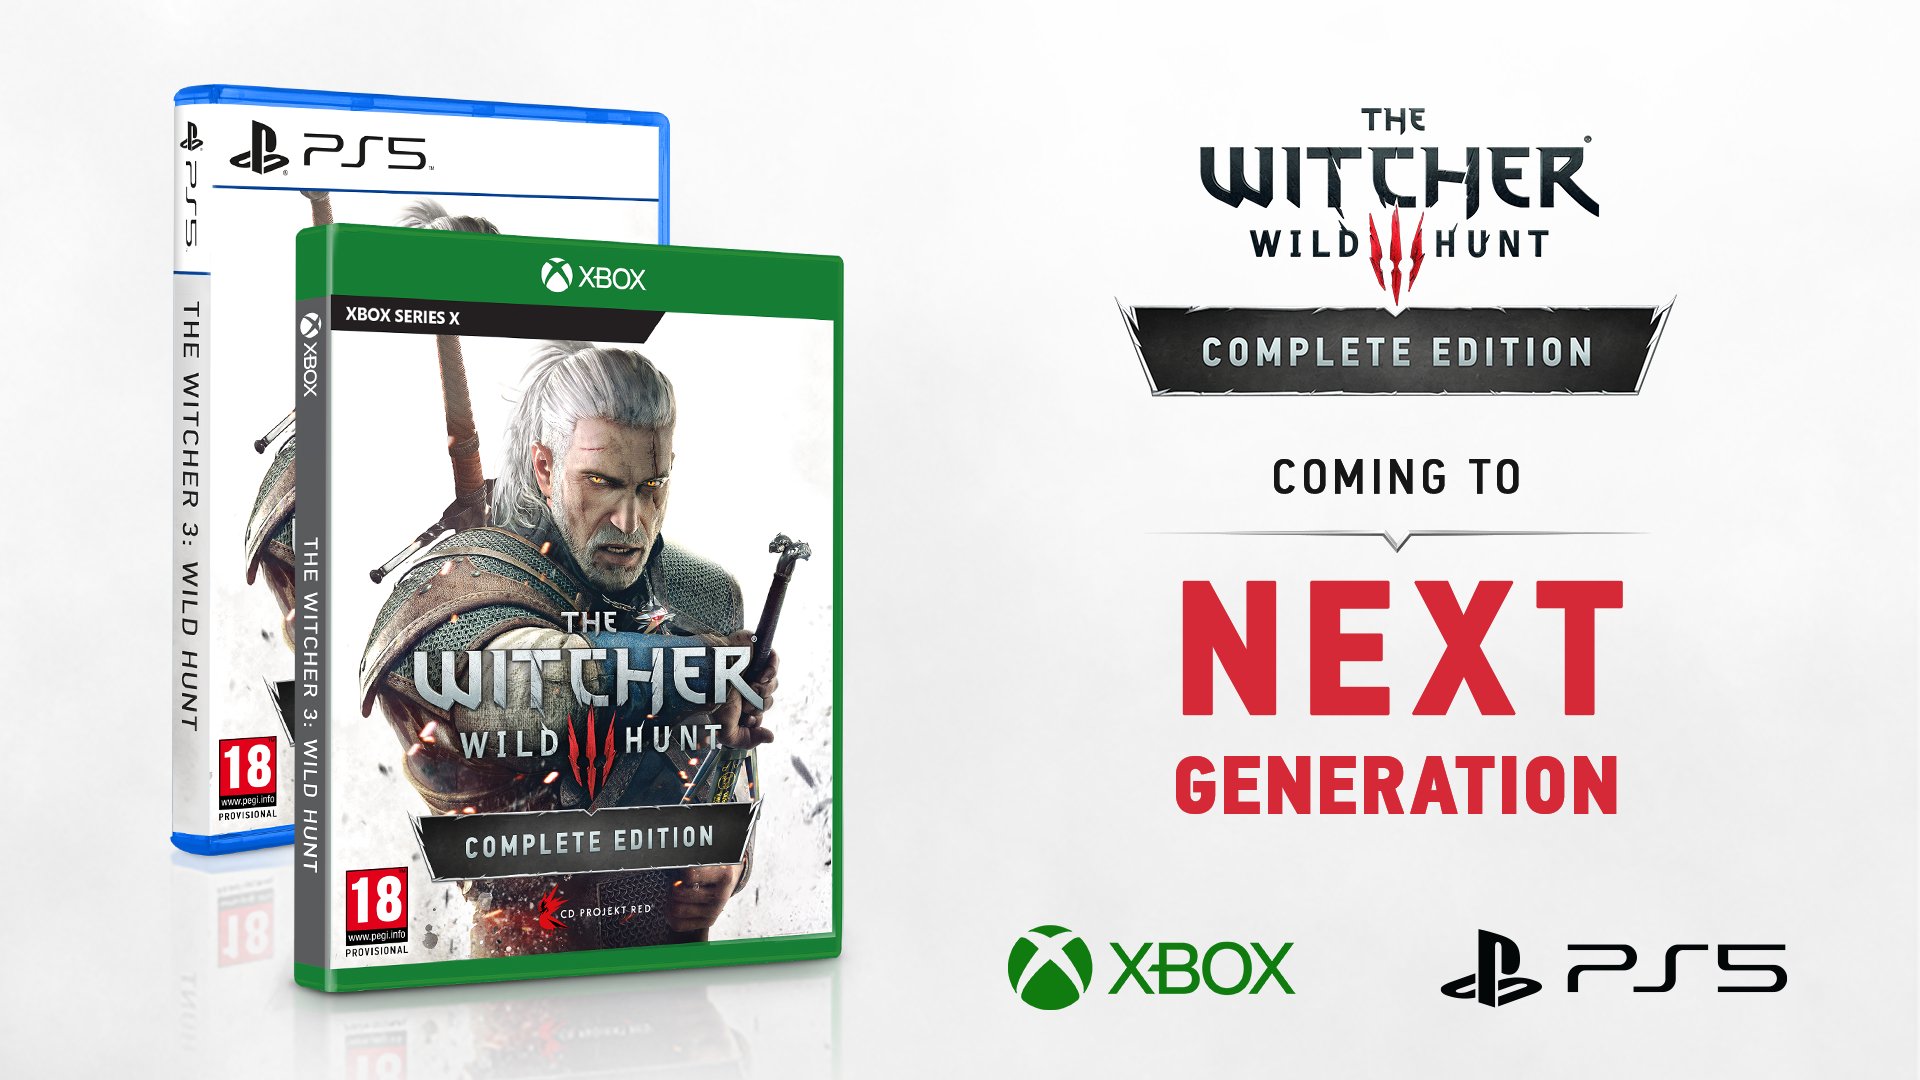 The Witcher on Twitter: "The Witcher 3 coming to the next generation! A visually and technically enhanced version of the game will be available for purchase for PC and next-gen consoles